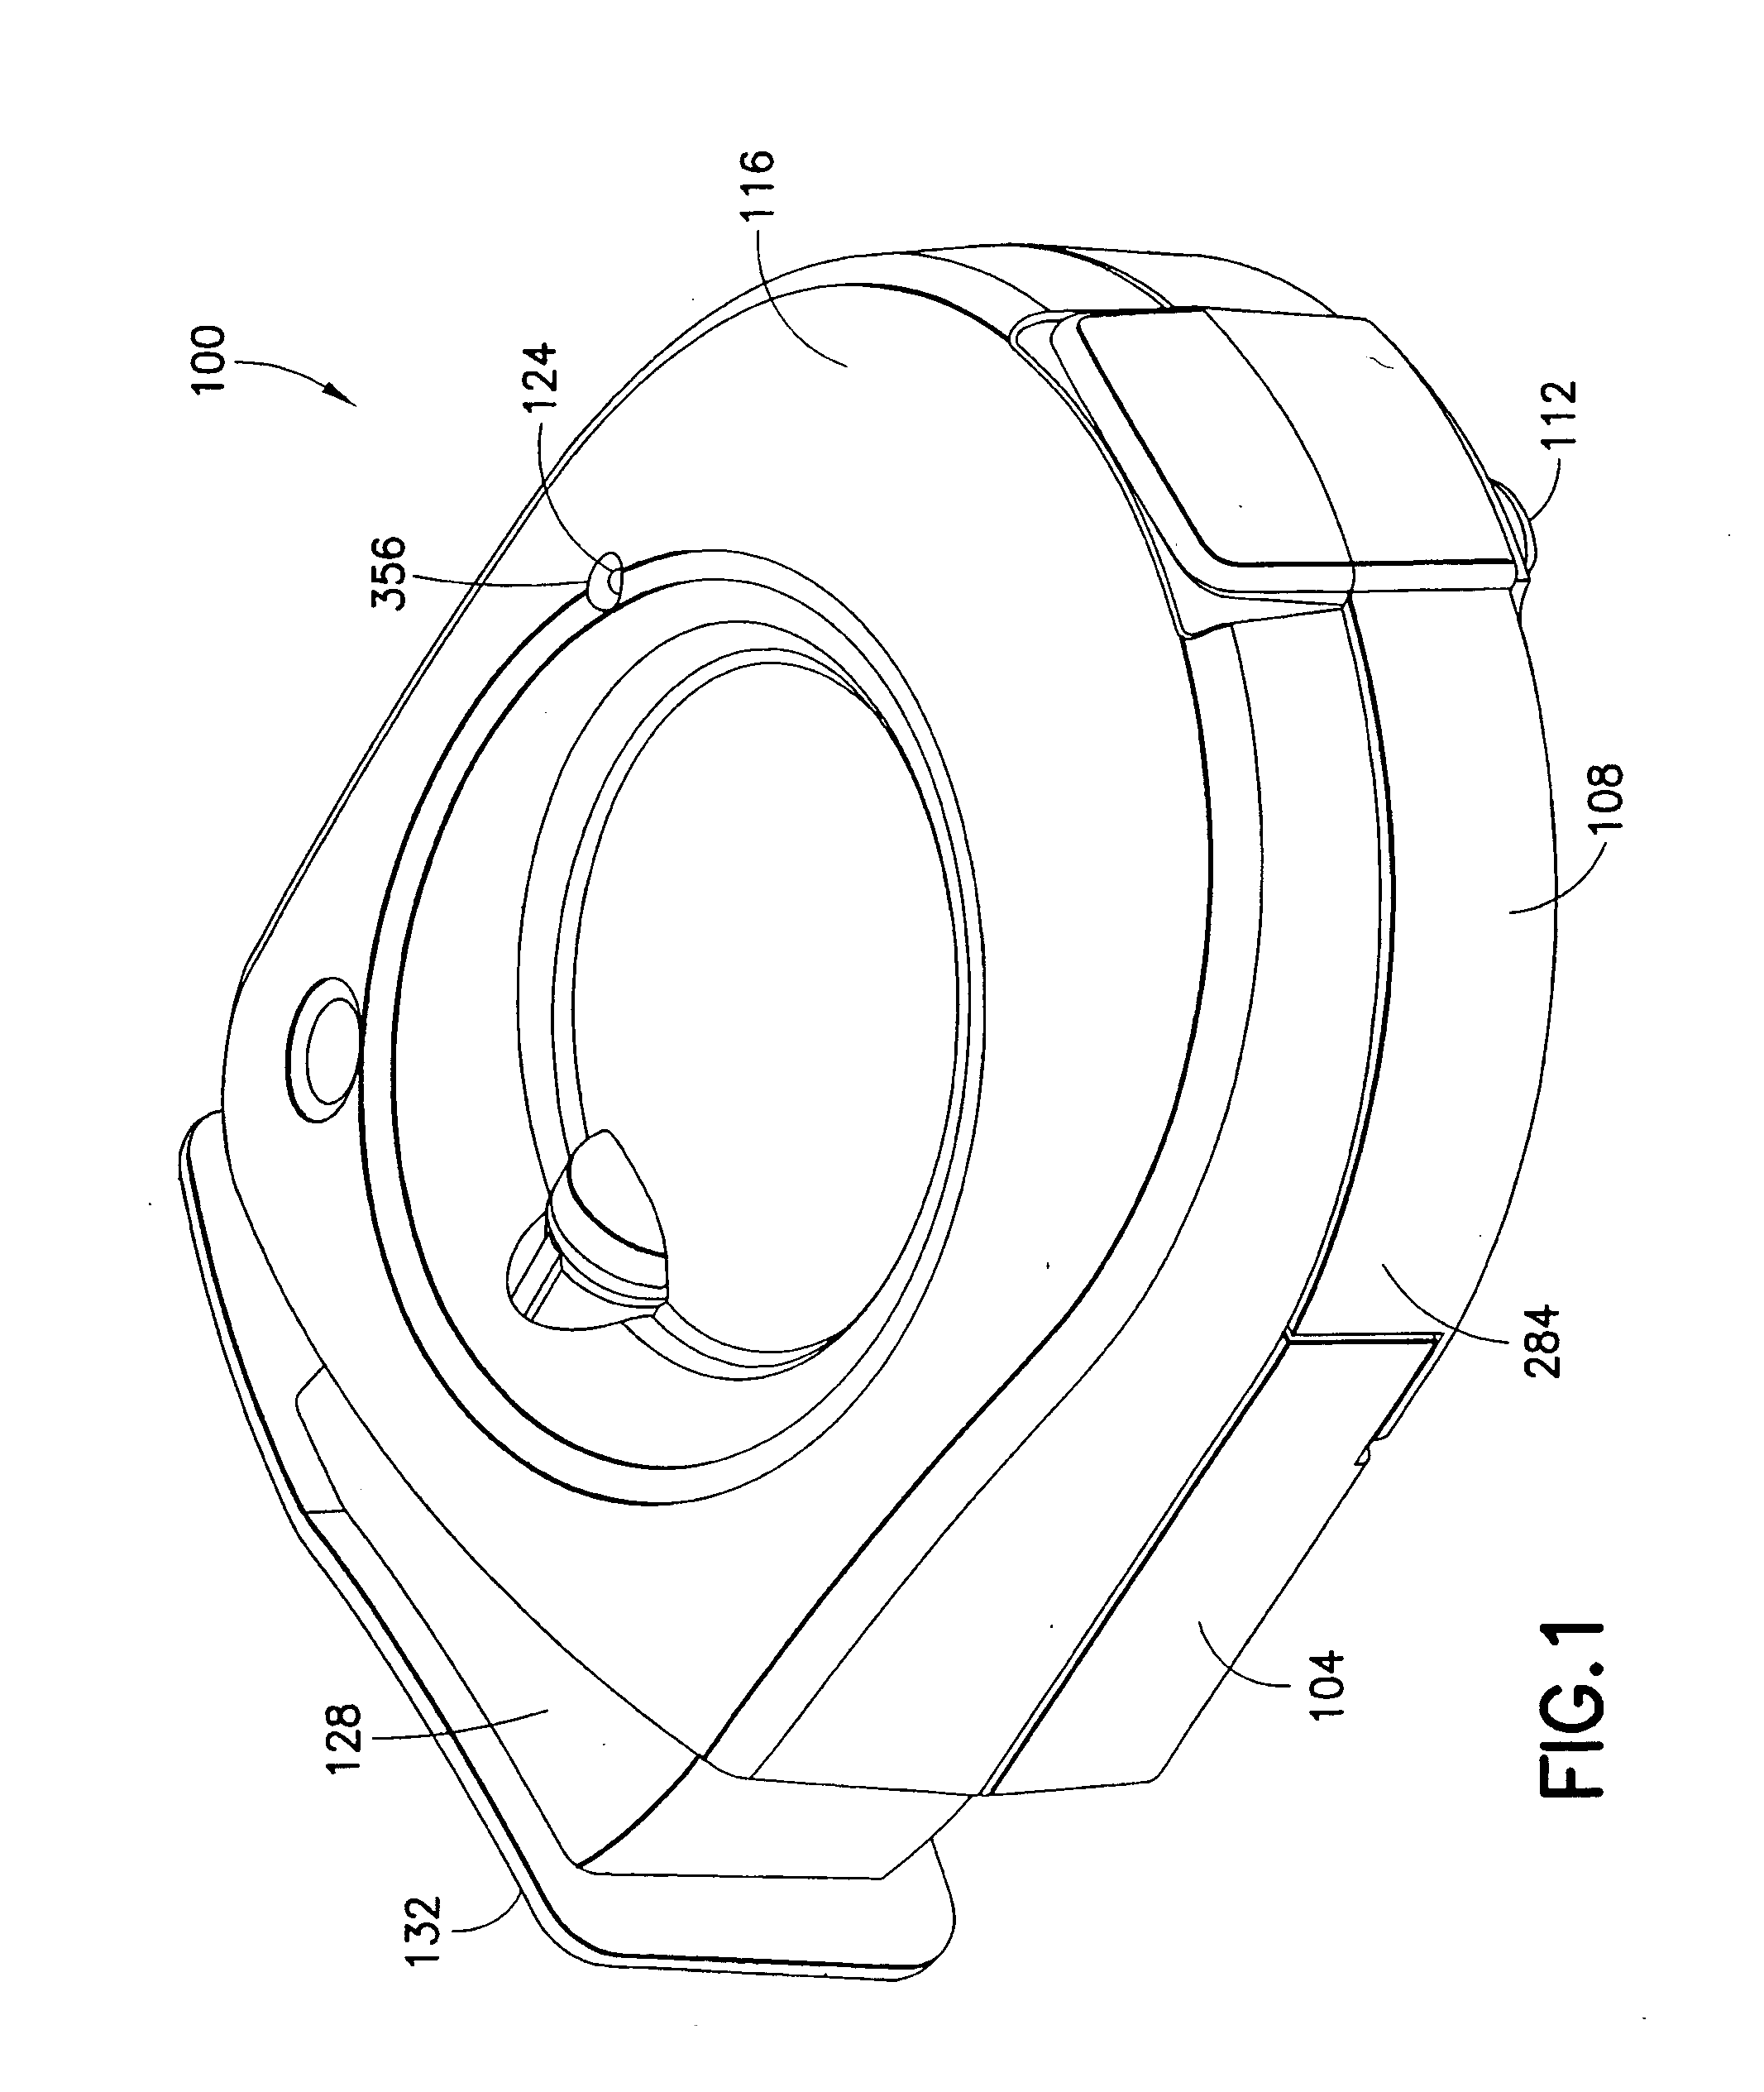 Self-Injection Device